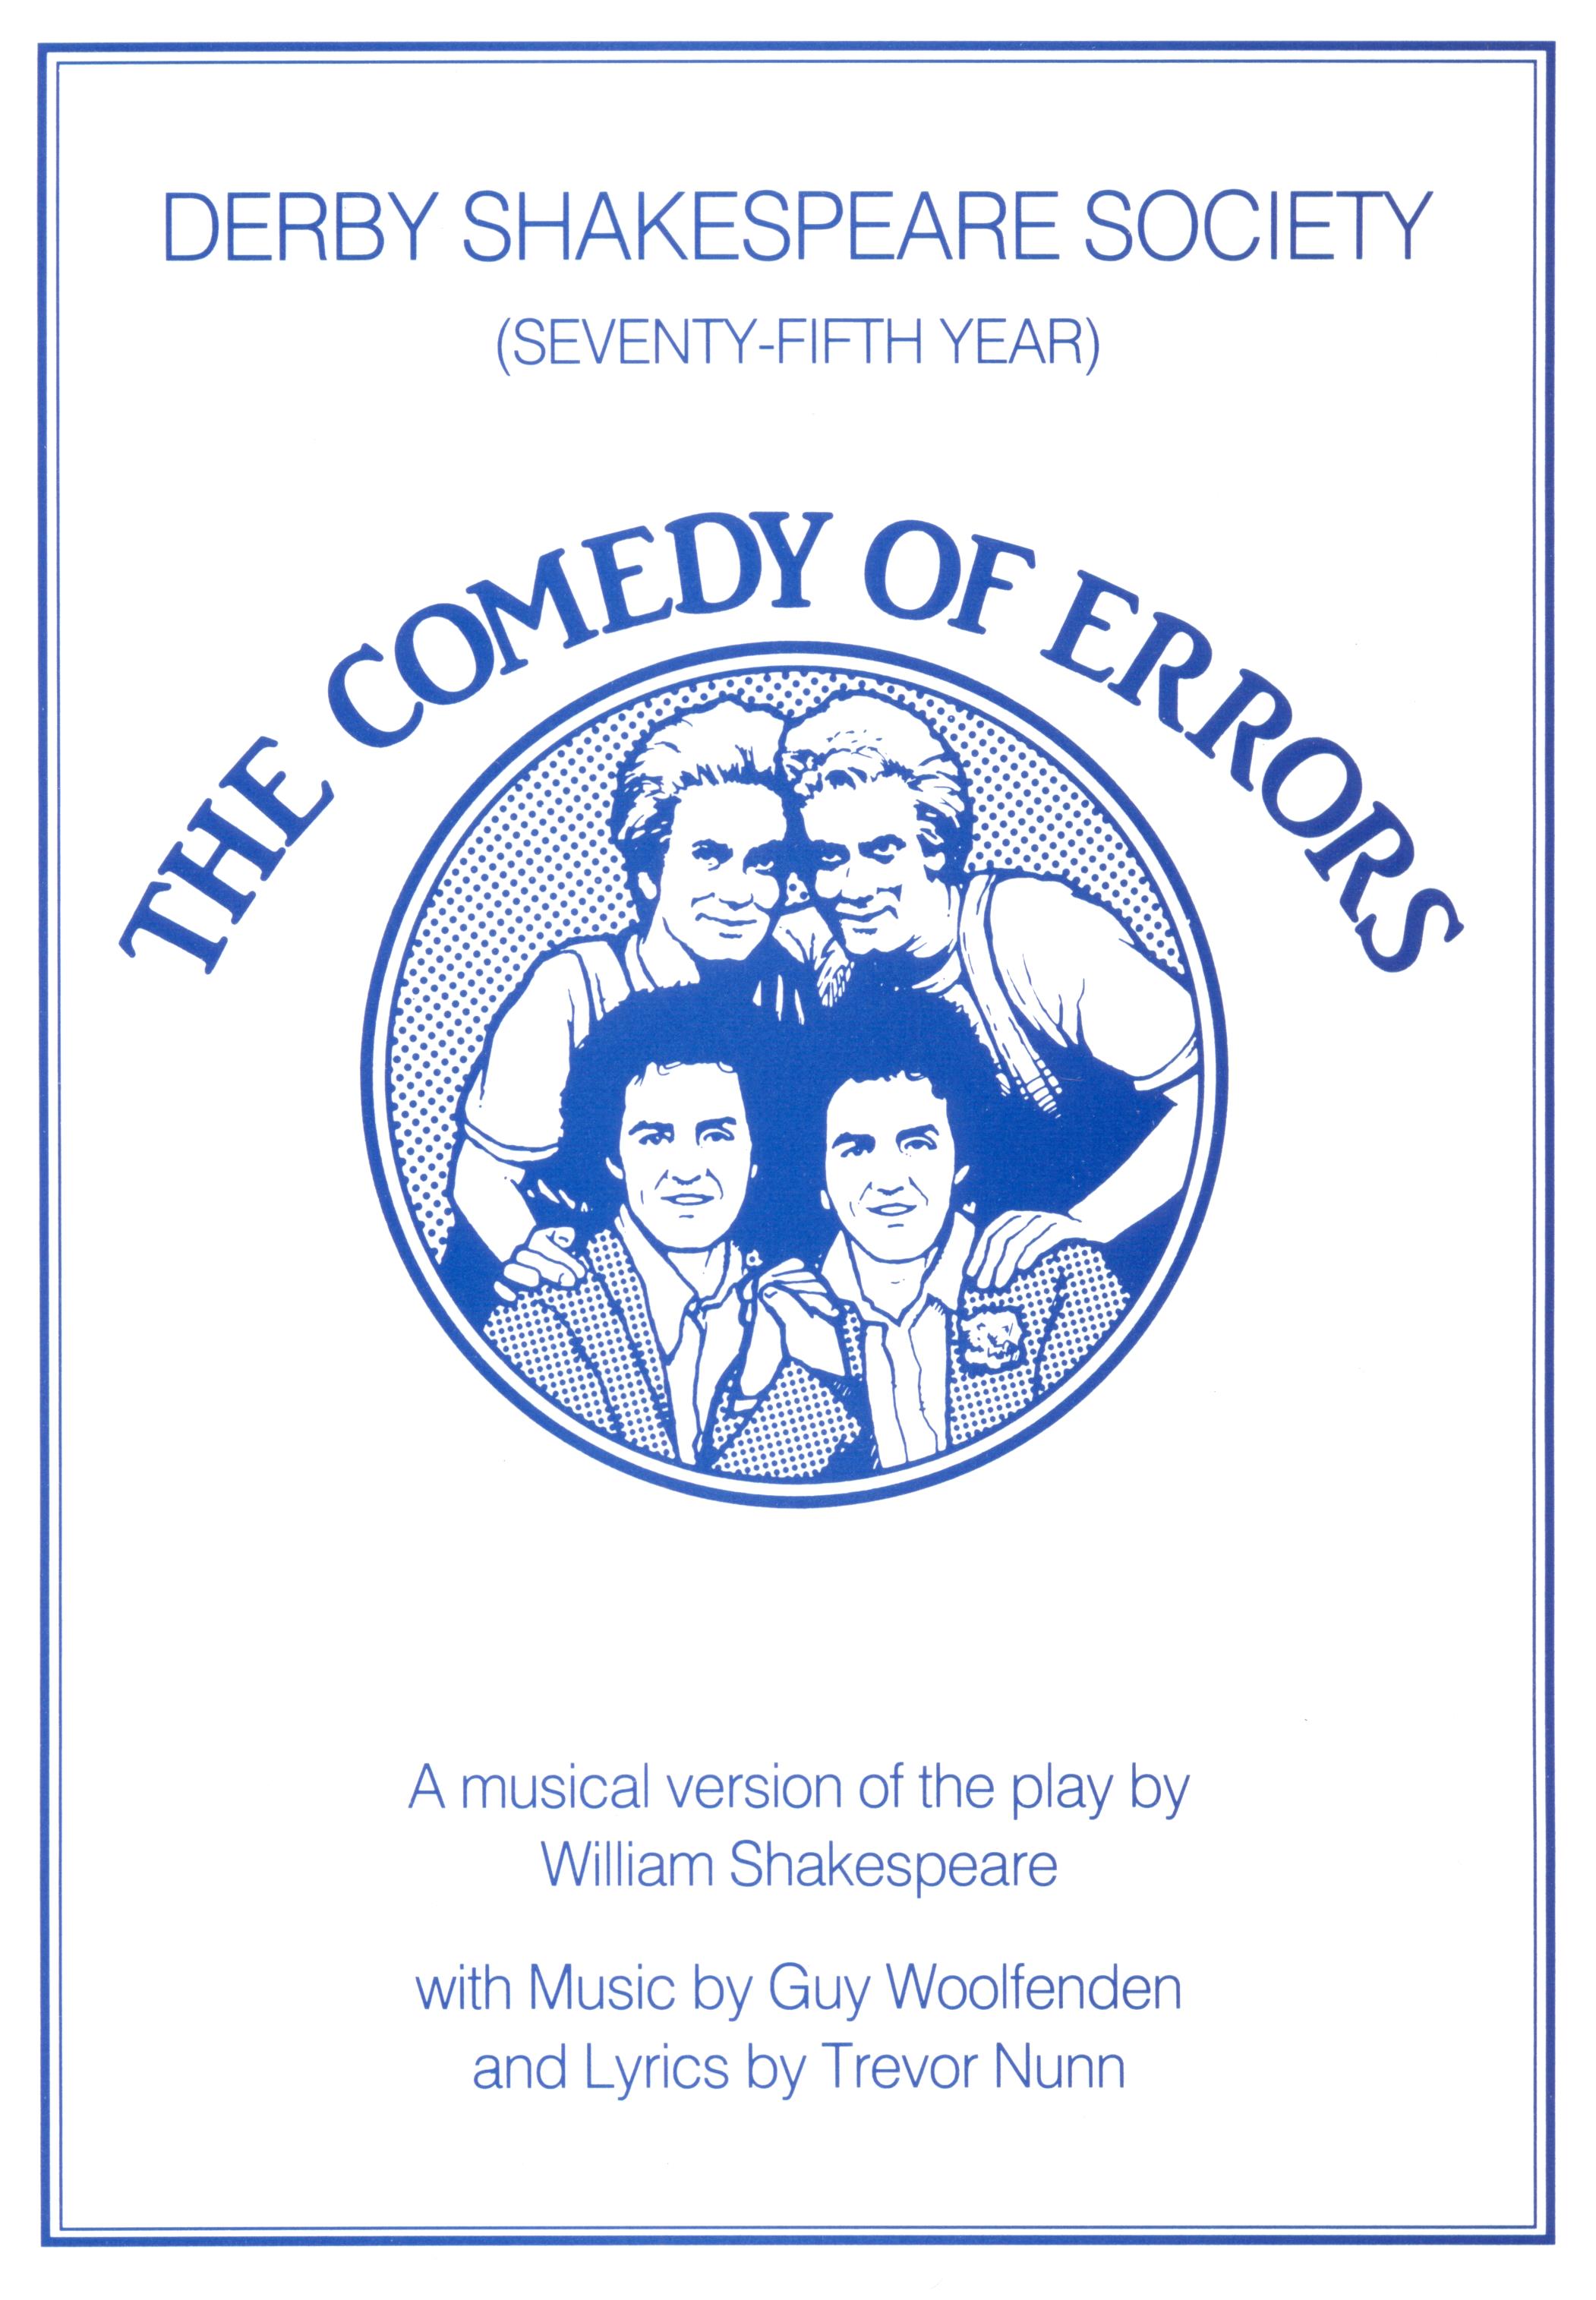 'The Comedy Of Errors' 1984